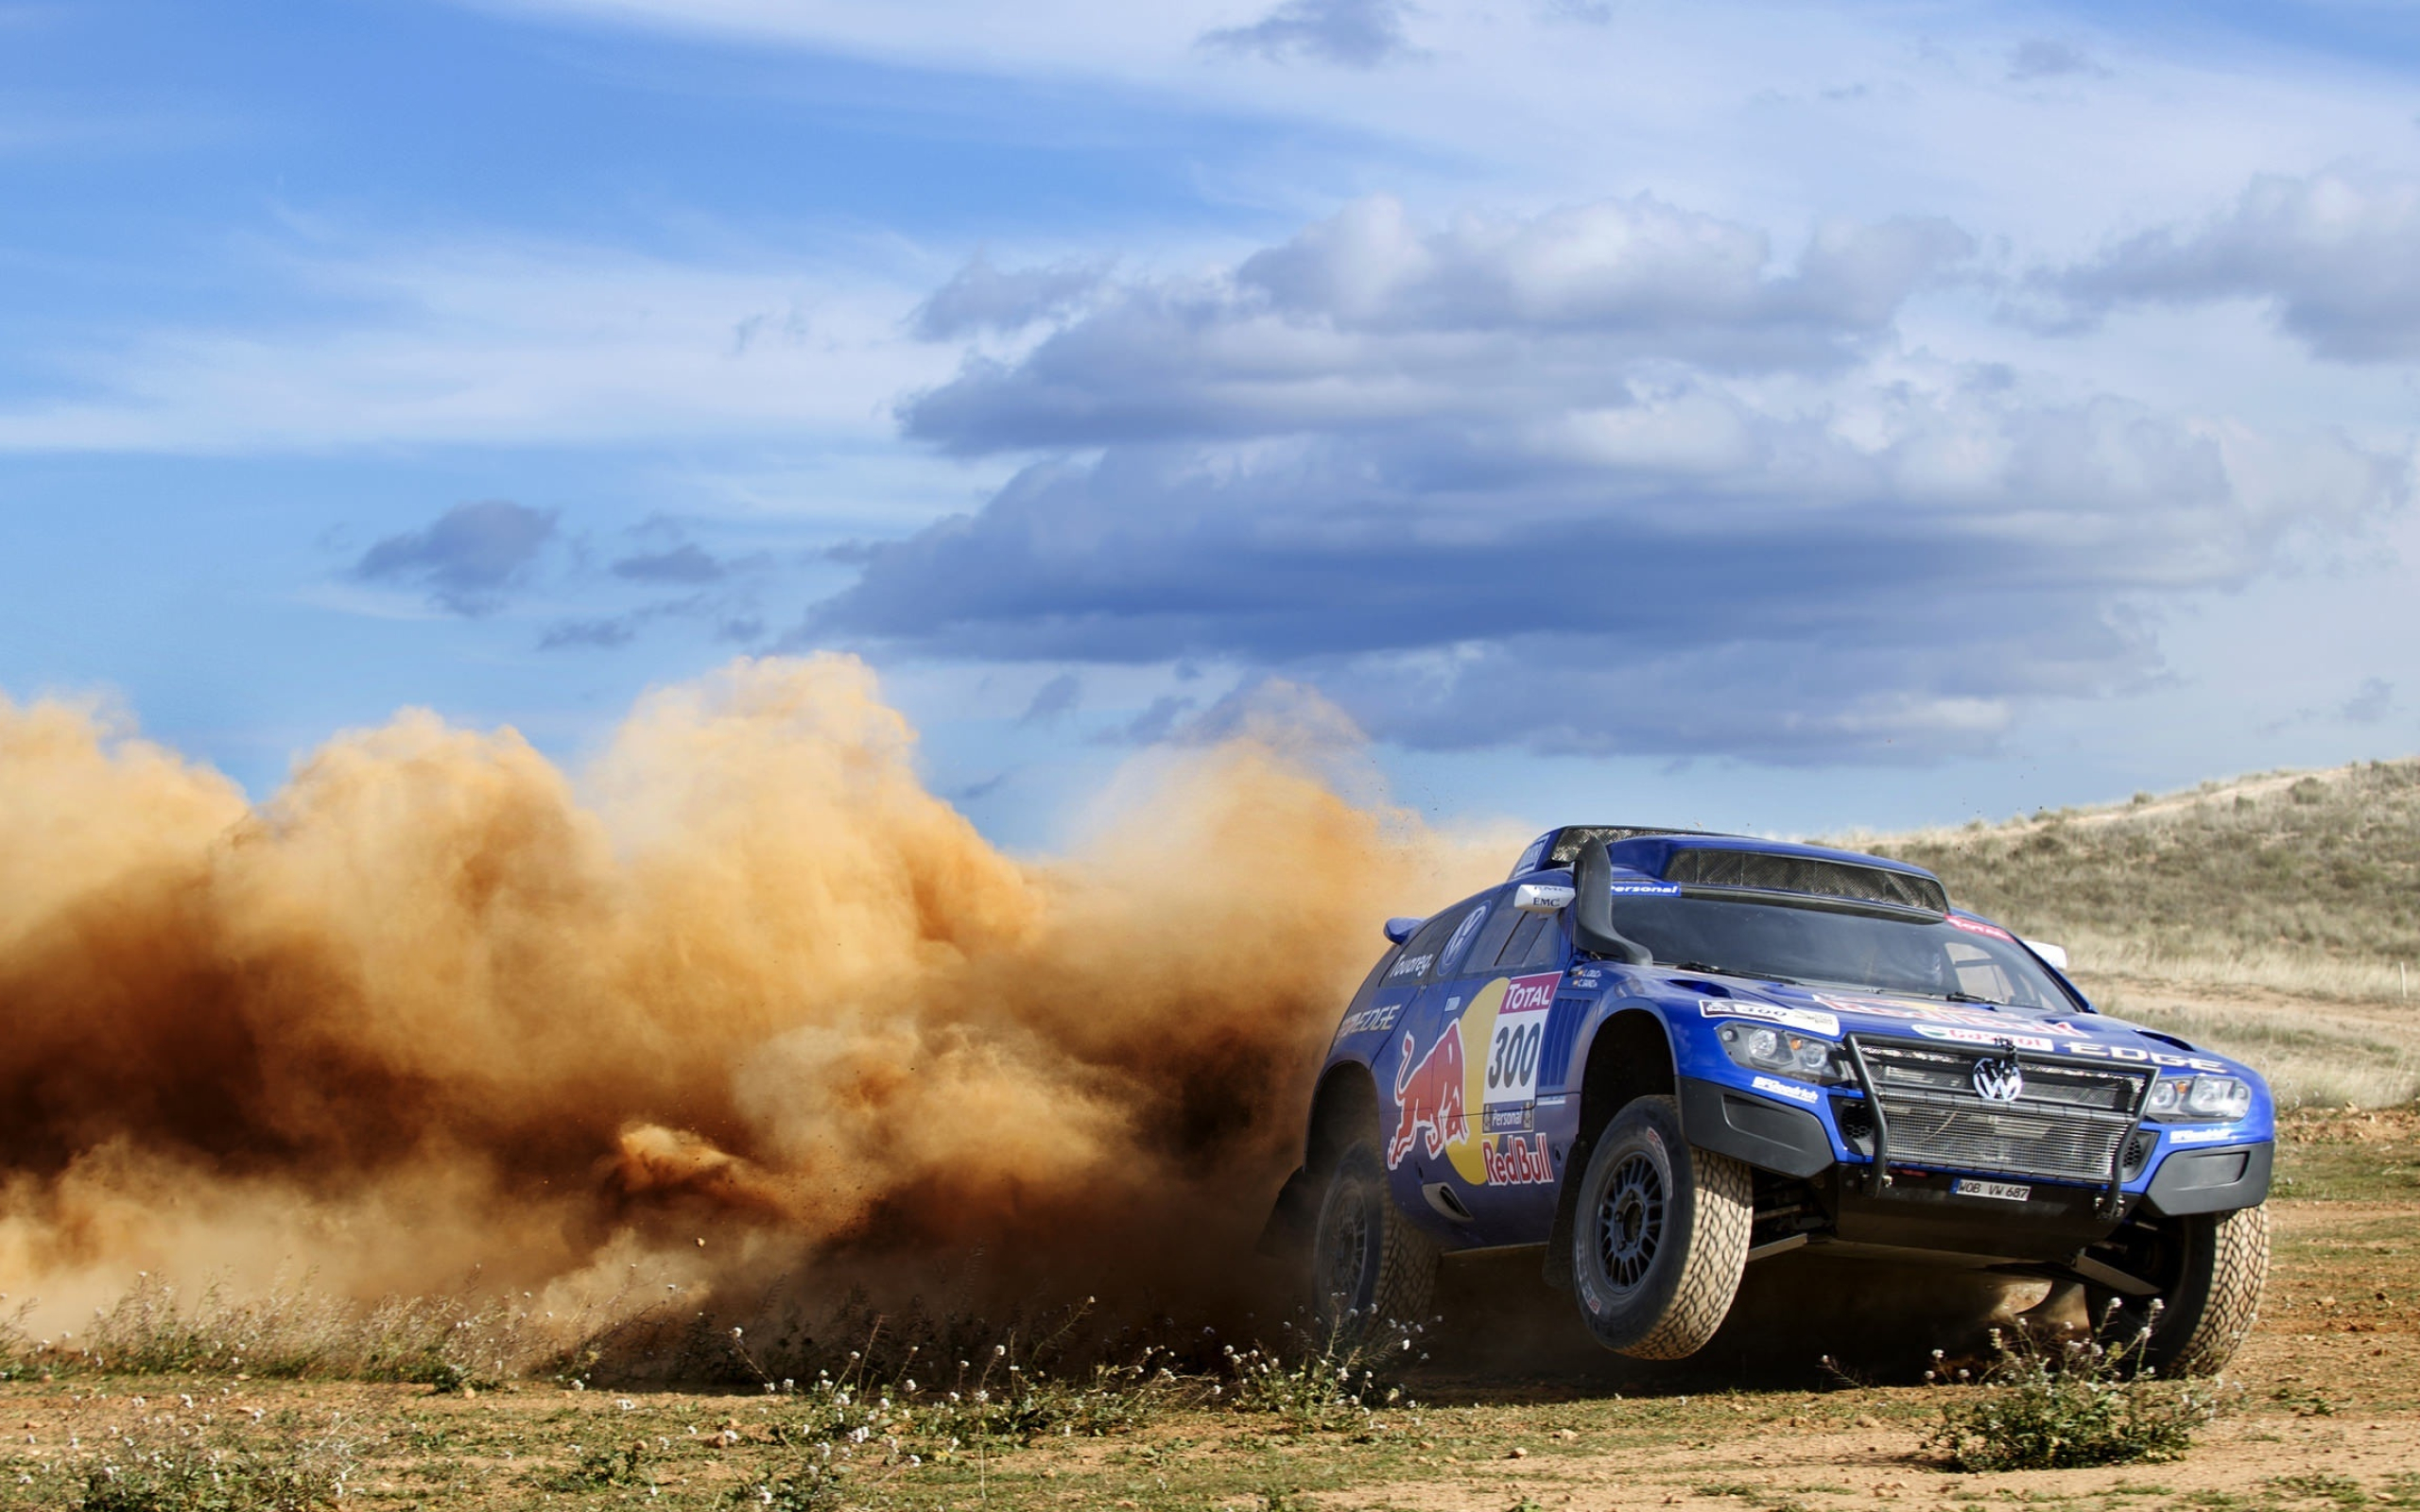 Rally Raid: Volkswagen Rally Racing, Red Bull, Extreme Drifting on Sandy Road, Off-road Car. 2560x1600 HD Wallpaper.